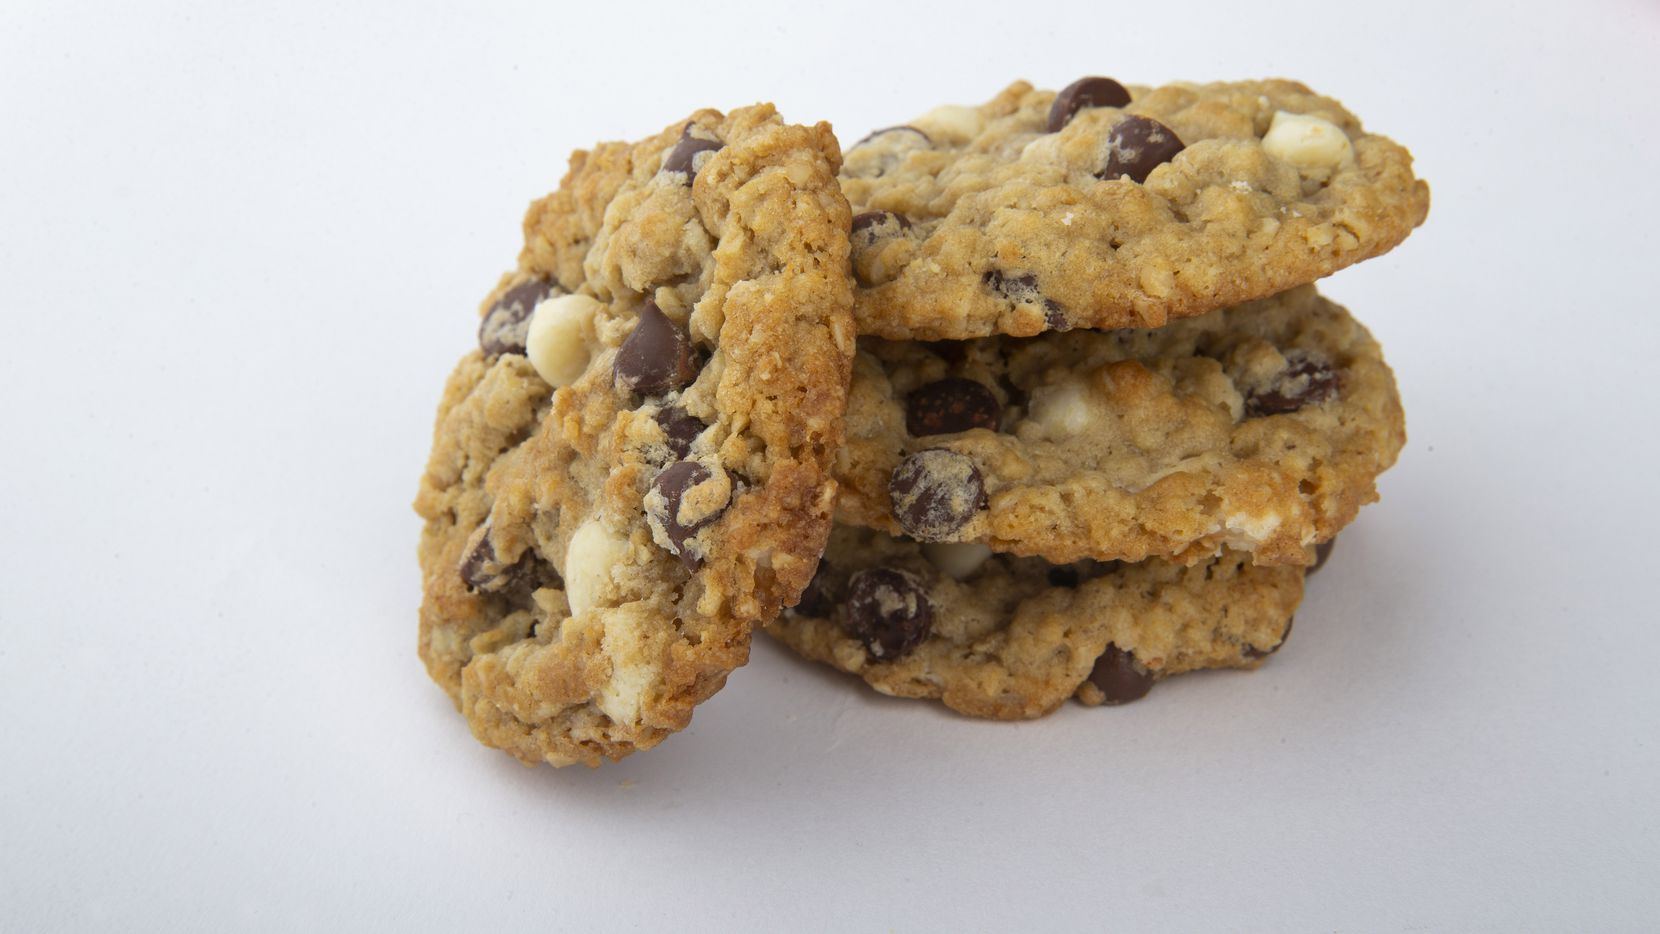 The oatmeal chocolate chip cookies made by Ann Pask won second place in the special diet...